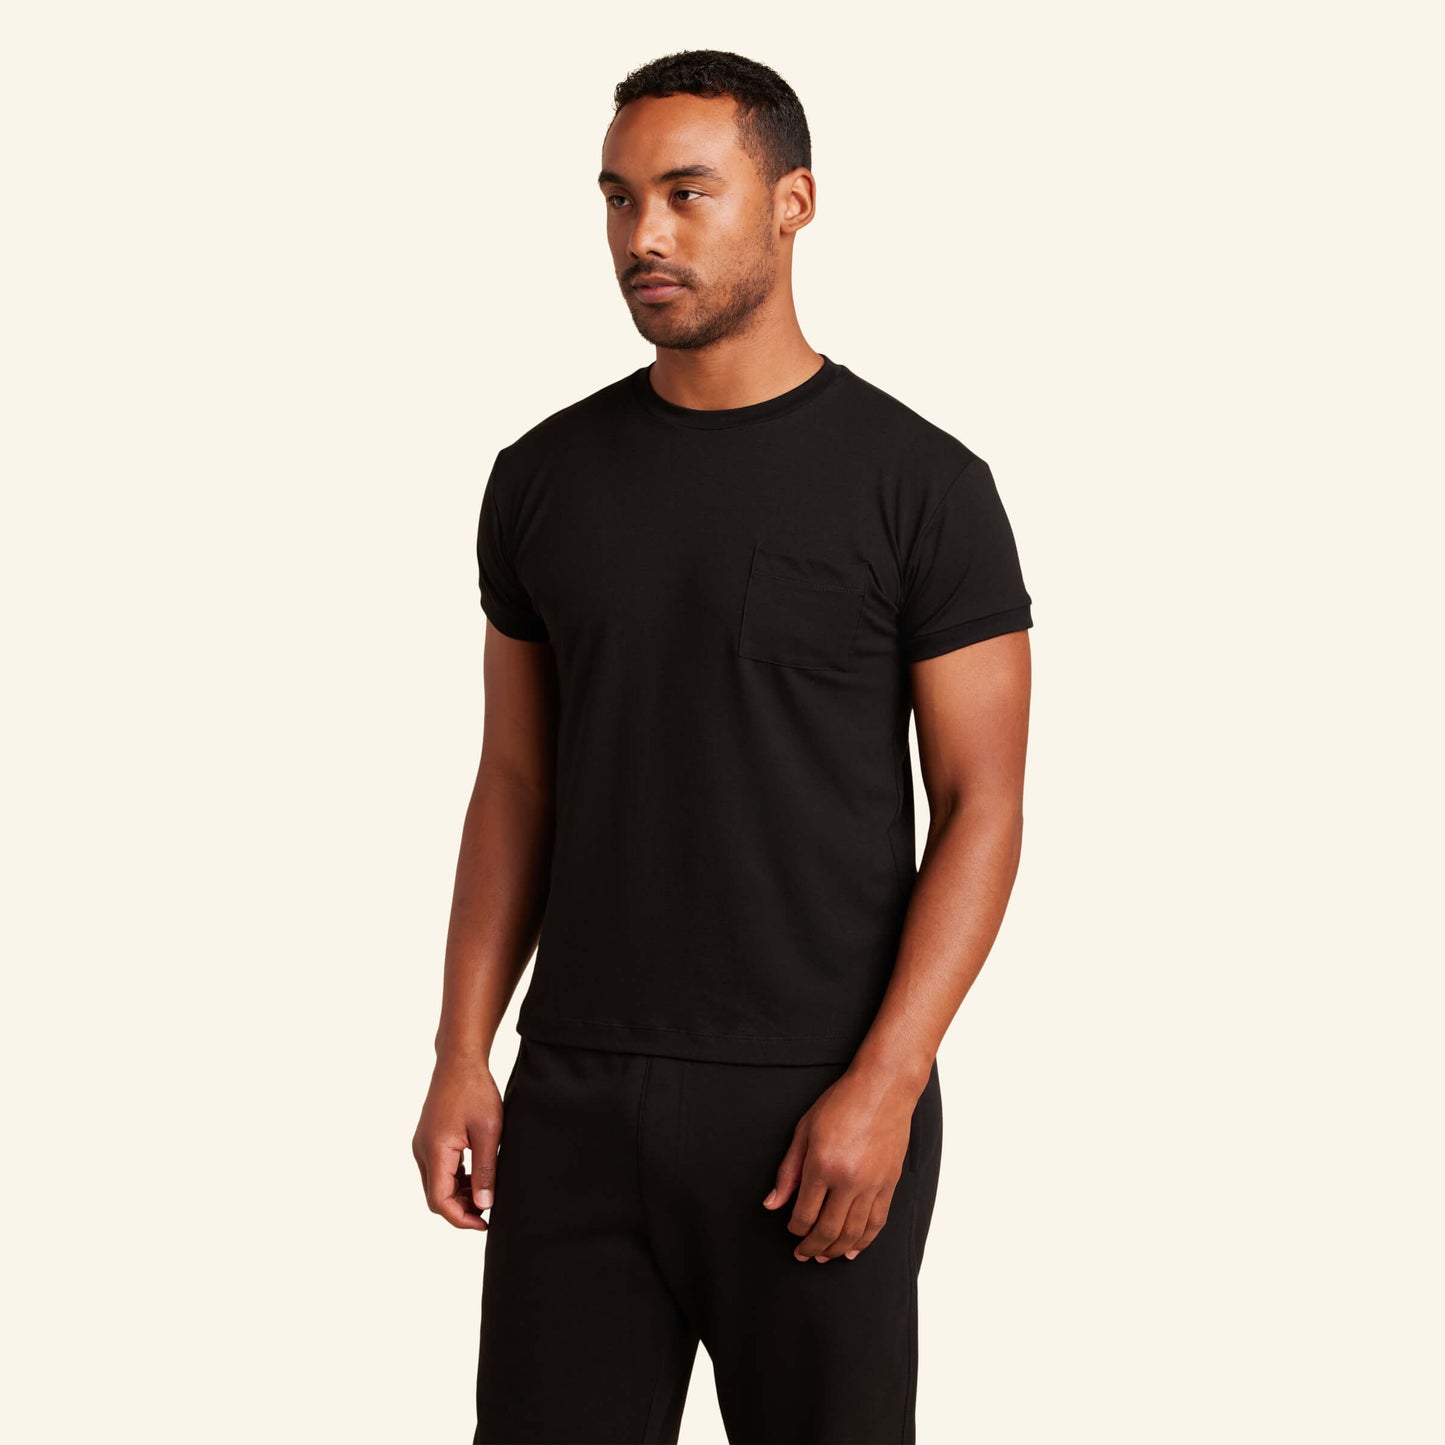 Man wearing the Slumber Cloud Essential Pocket Tee made with Outlast temperature regulation technology